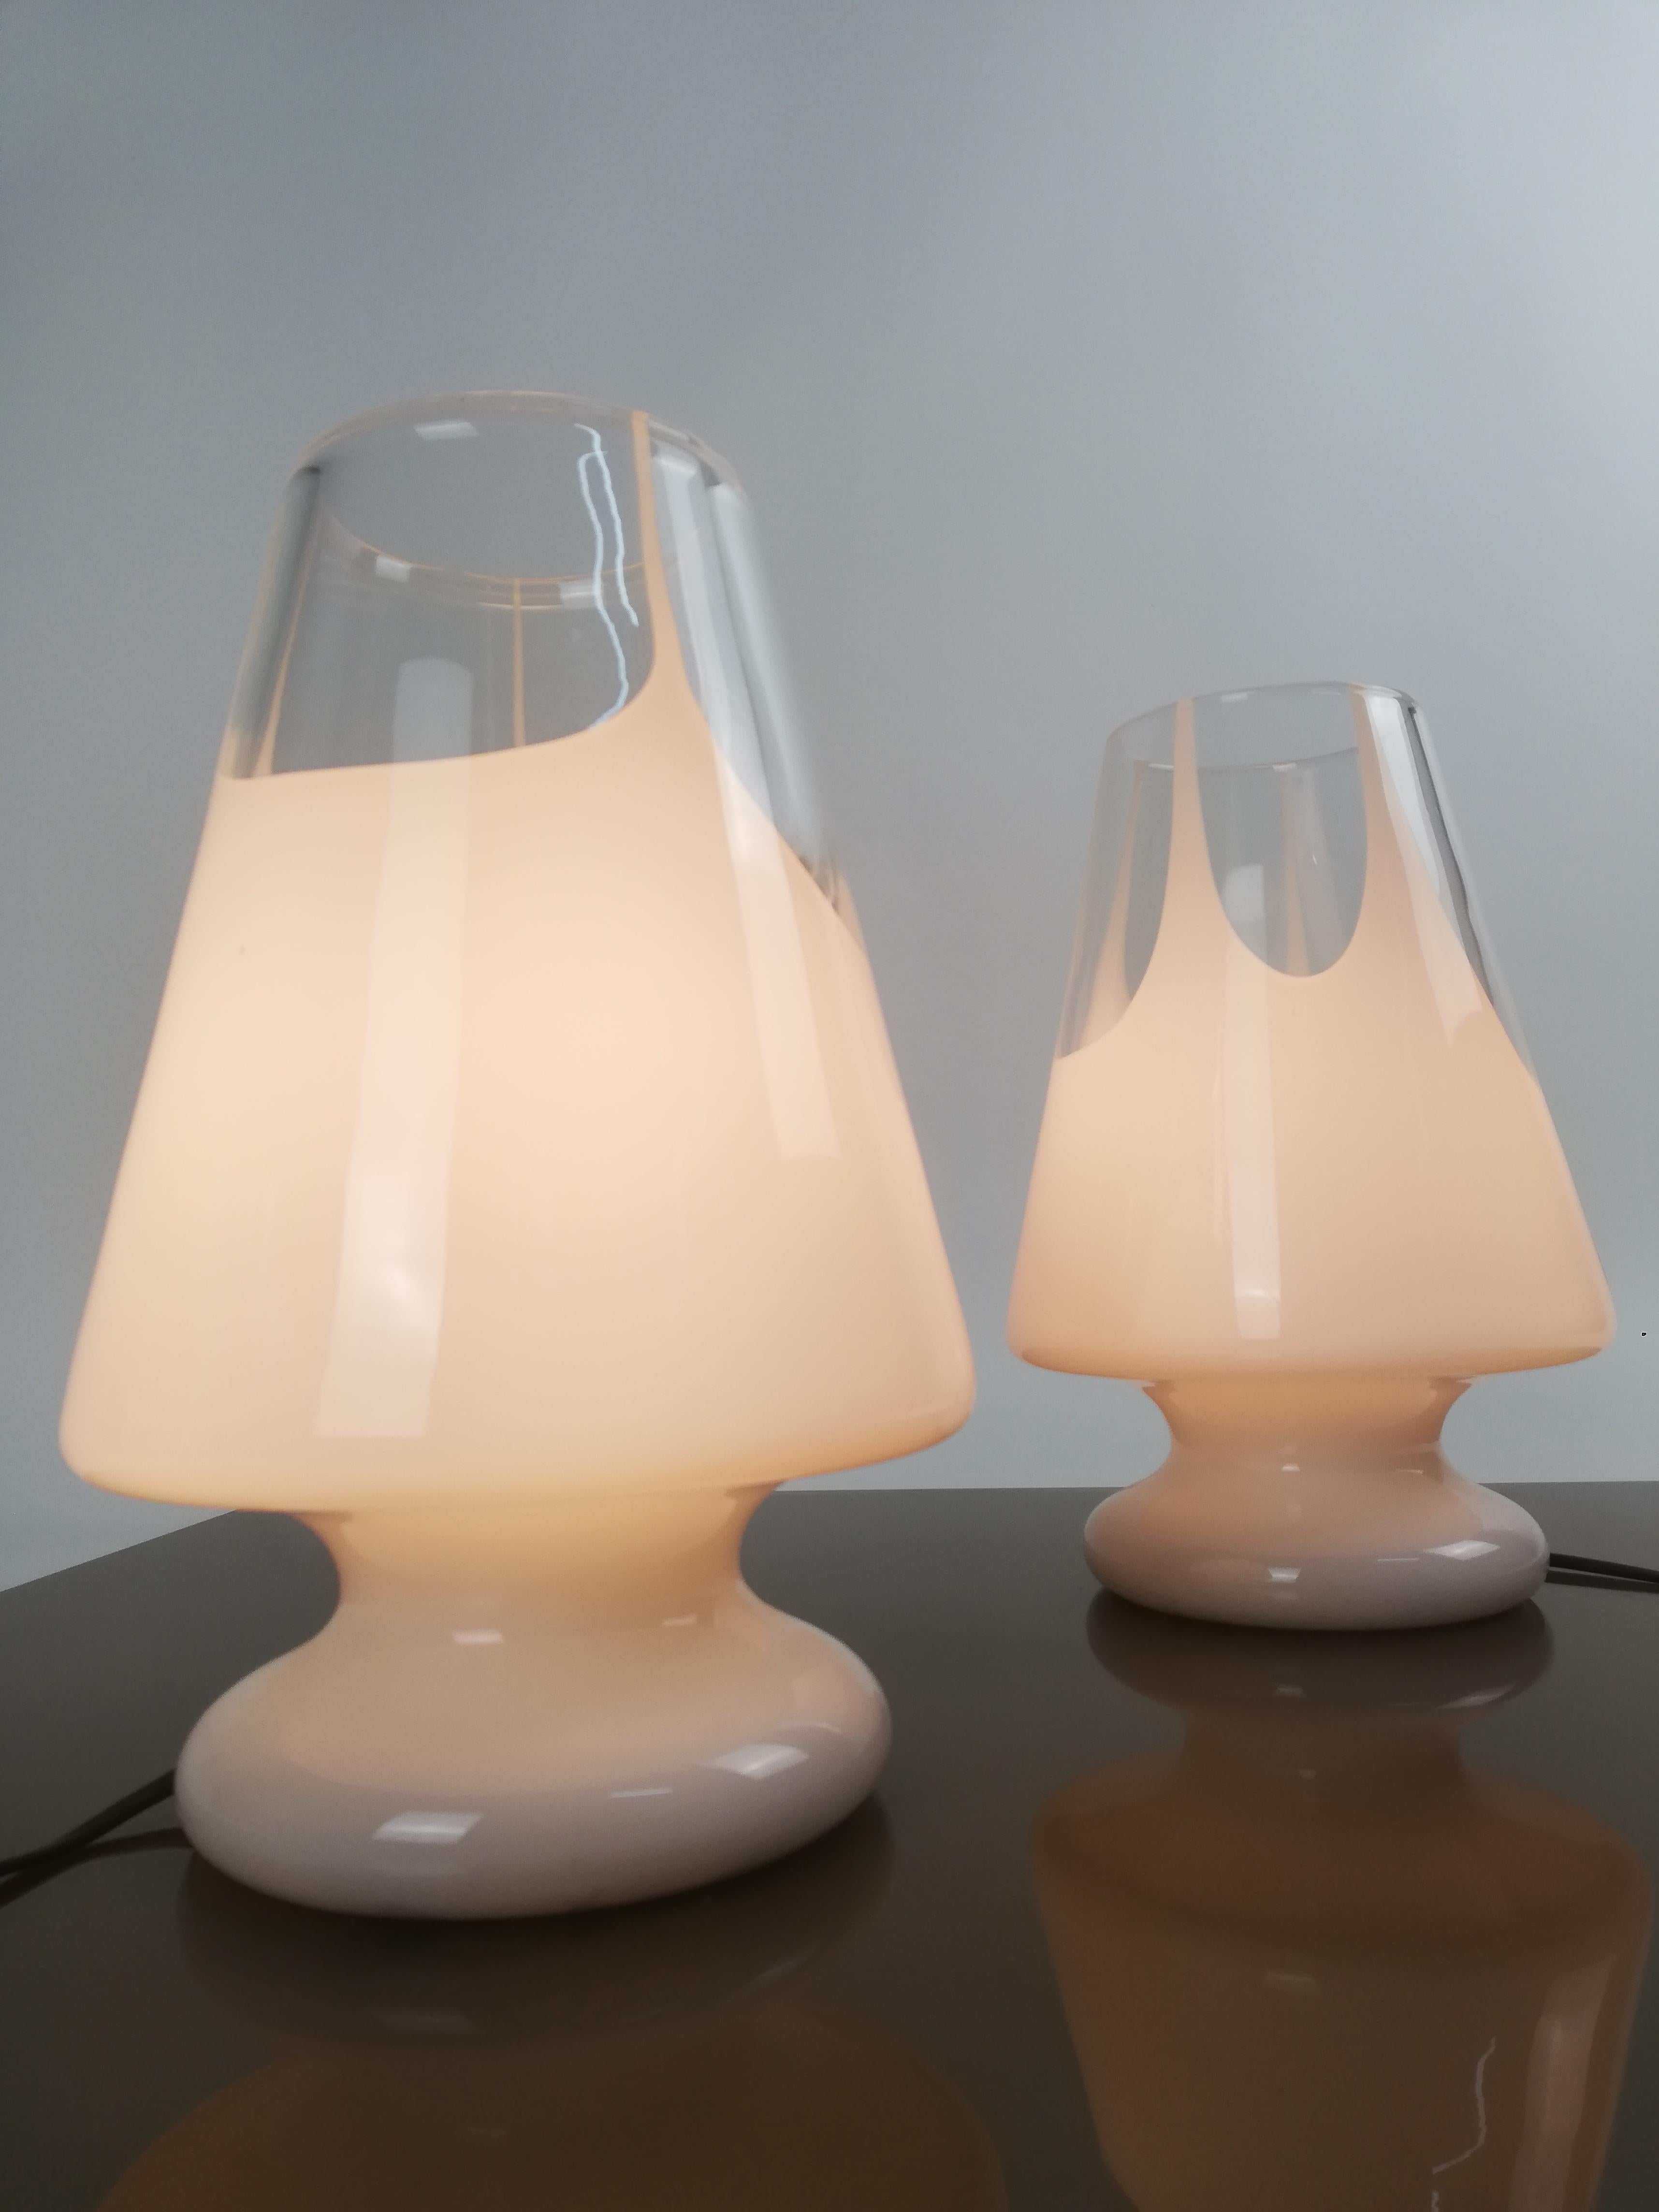 Pair of Table Lamps by Prima Luce in White Artistic Murano Glass, Italy, 1970s For Sale 3